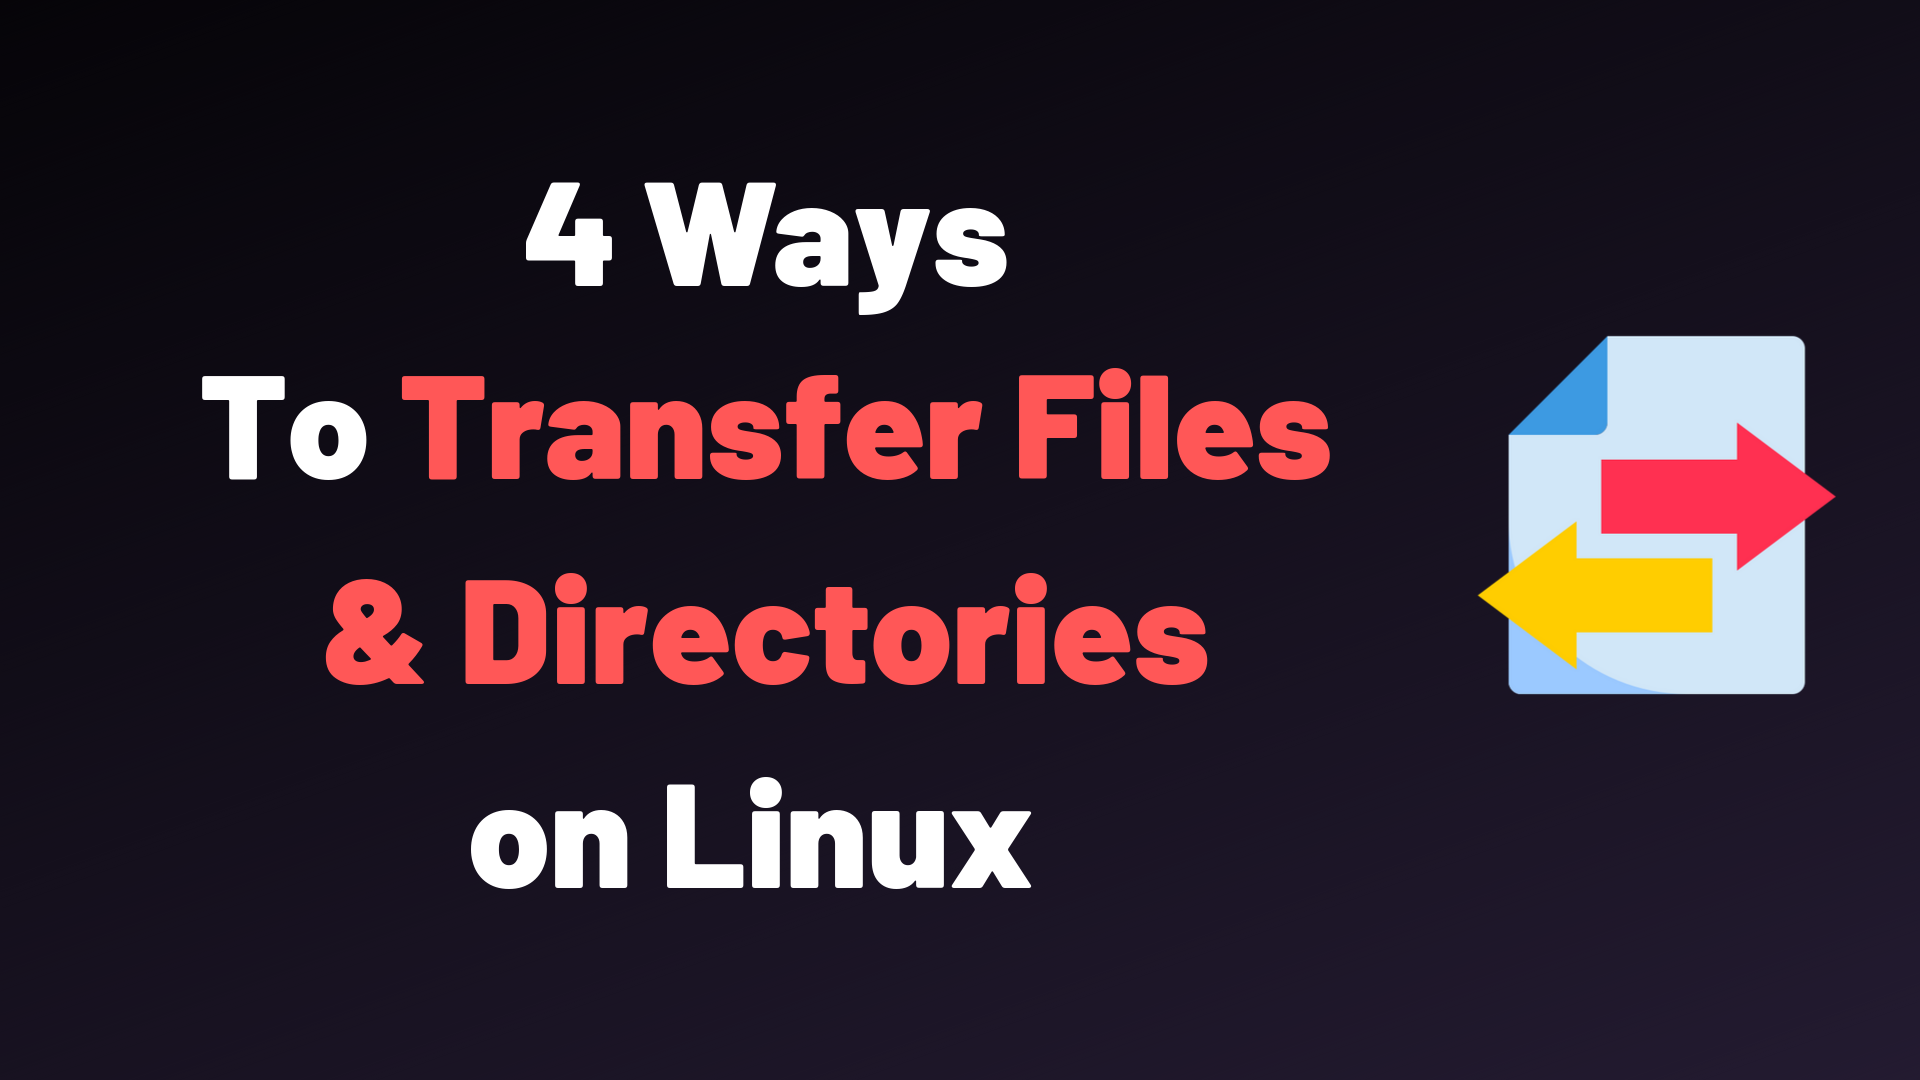 reach stout yarn 4 Ways to Transfer Files and Directories on Linux – devconnected